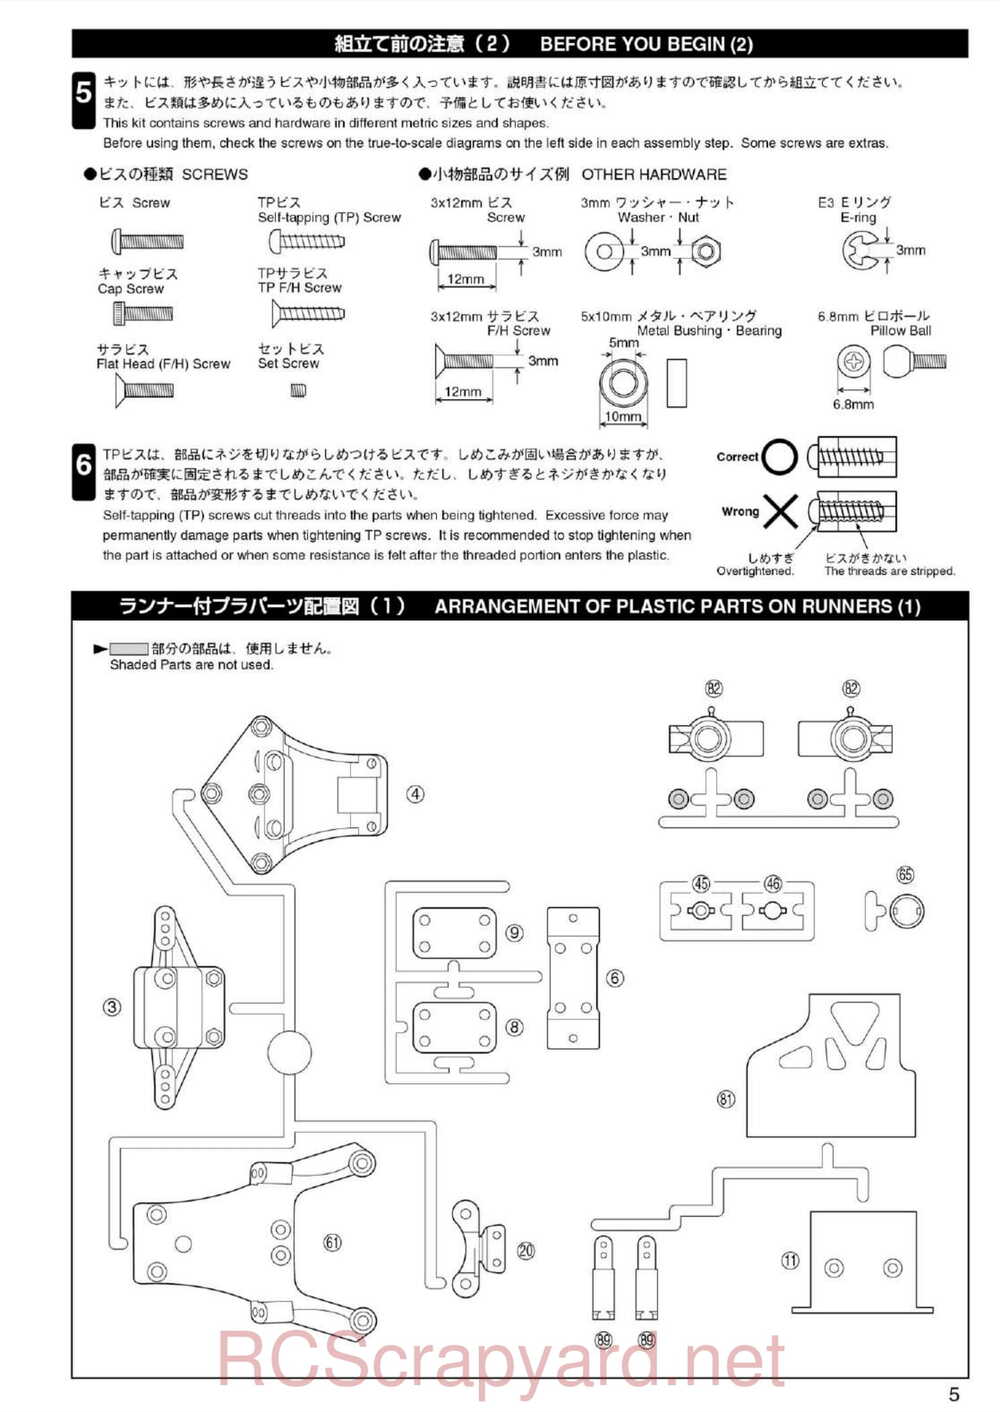 Kyosho - 30074 - Ultima-RB5 - Manual - Page 05